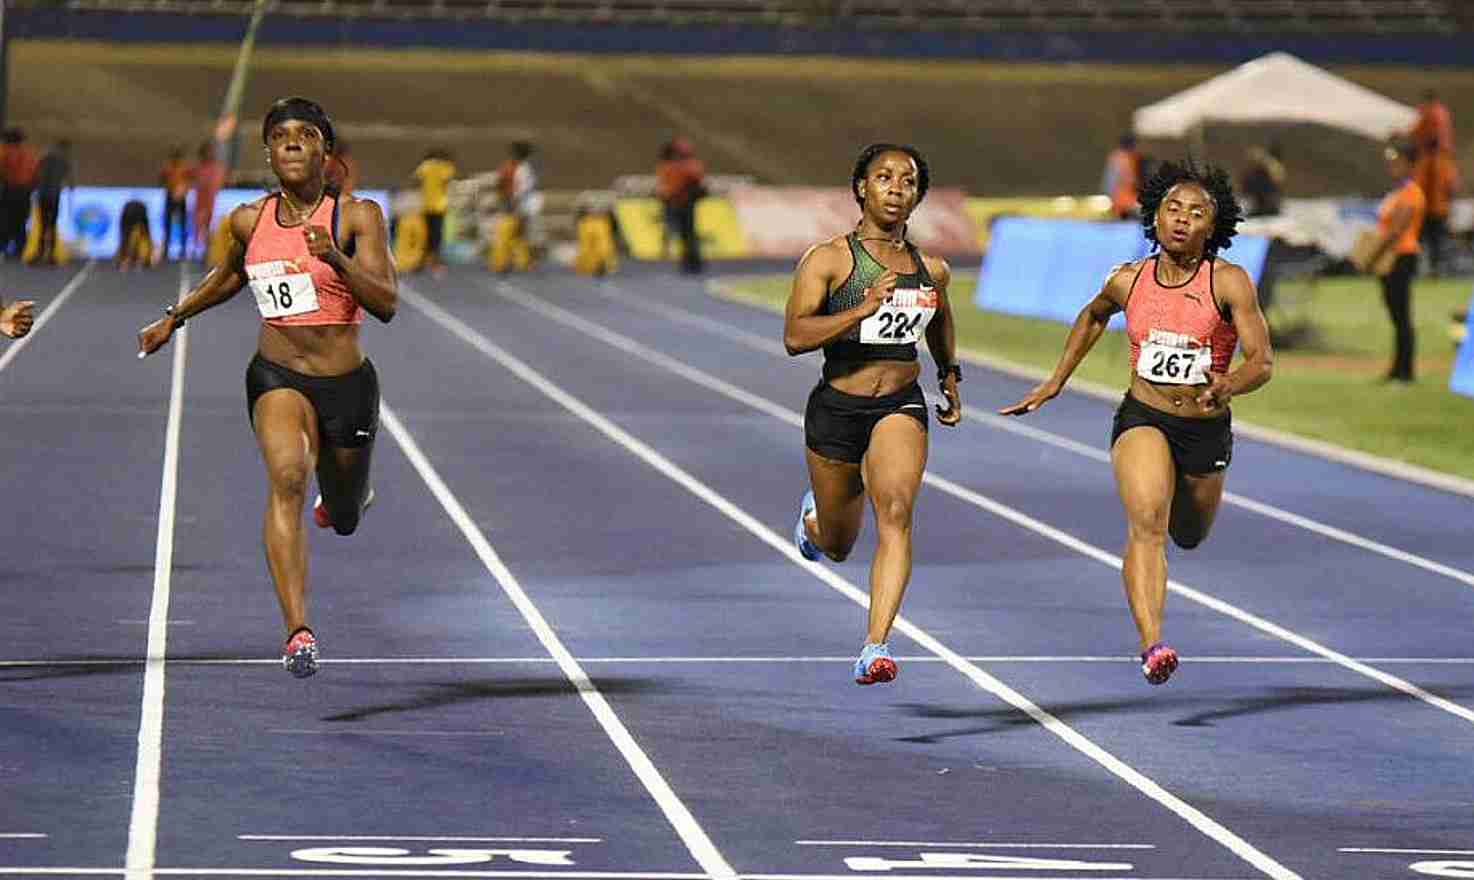 Shelly-Ann Fraser-Pryce, Shericka Jackson cruised into 200m final at Jamaica Championships